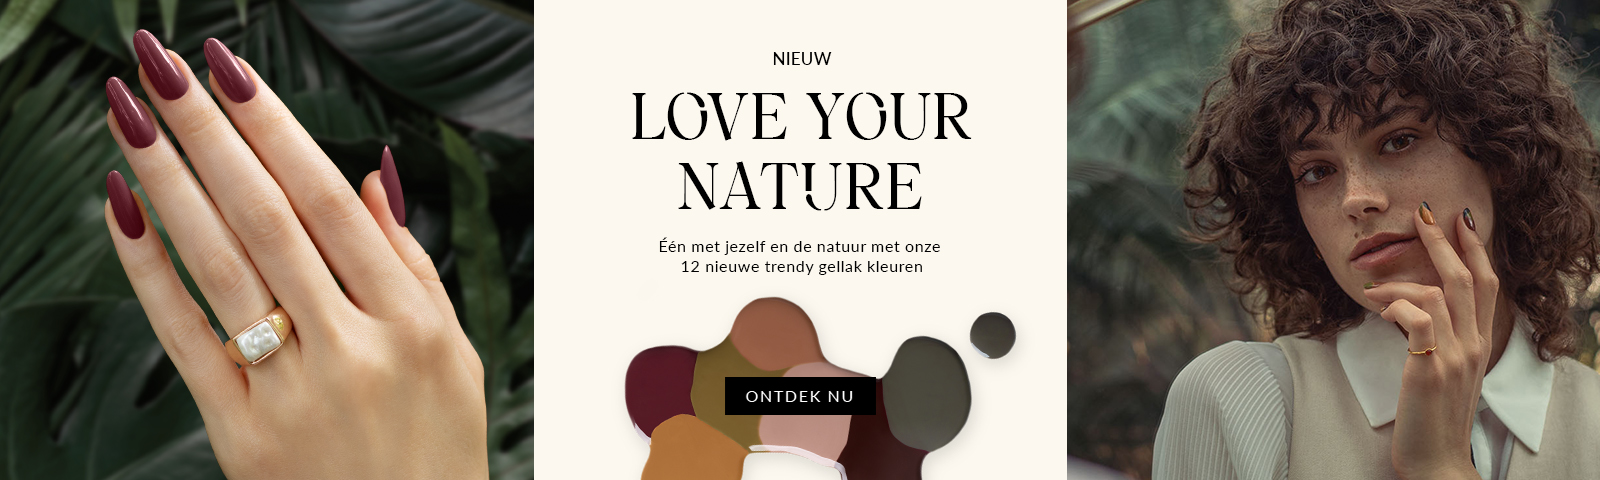 LOVE YOUR NATURE 29.08  